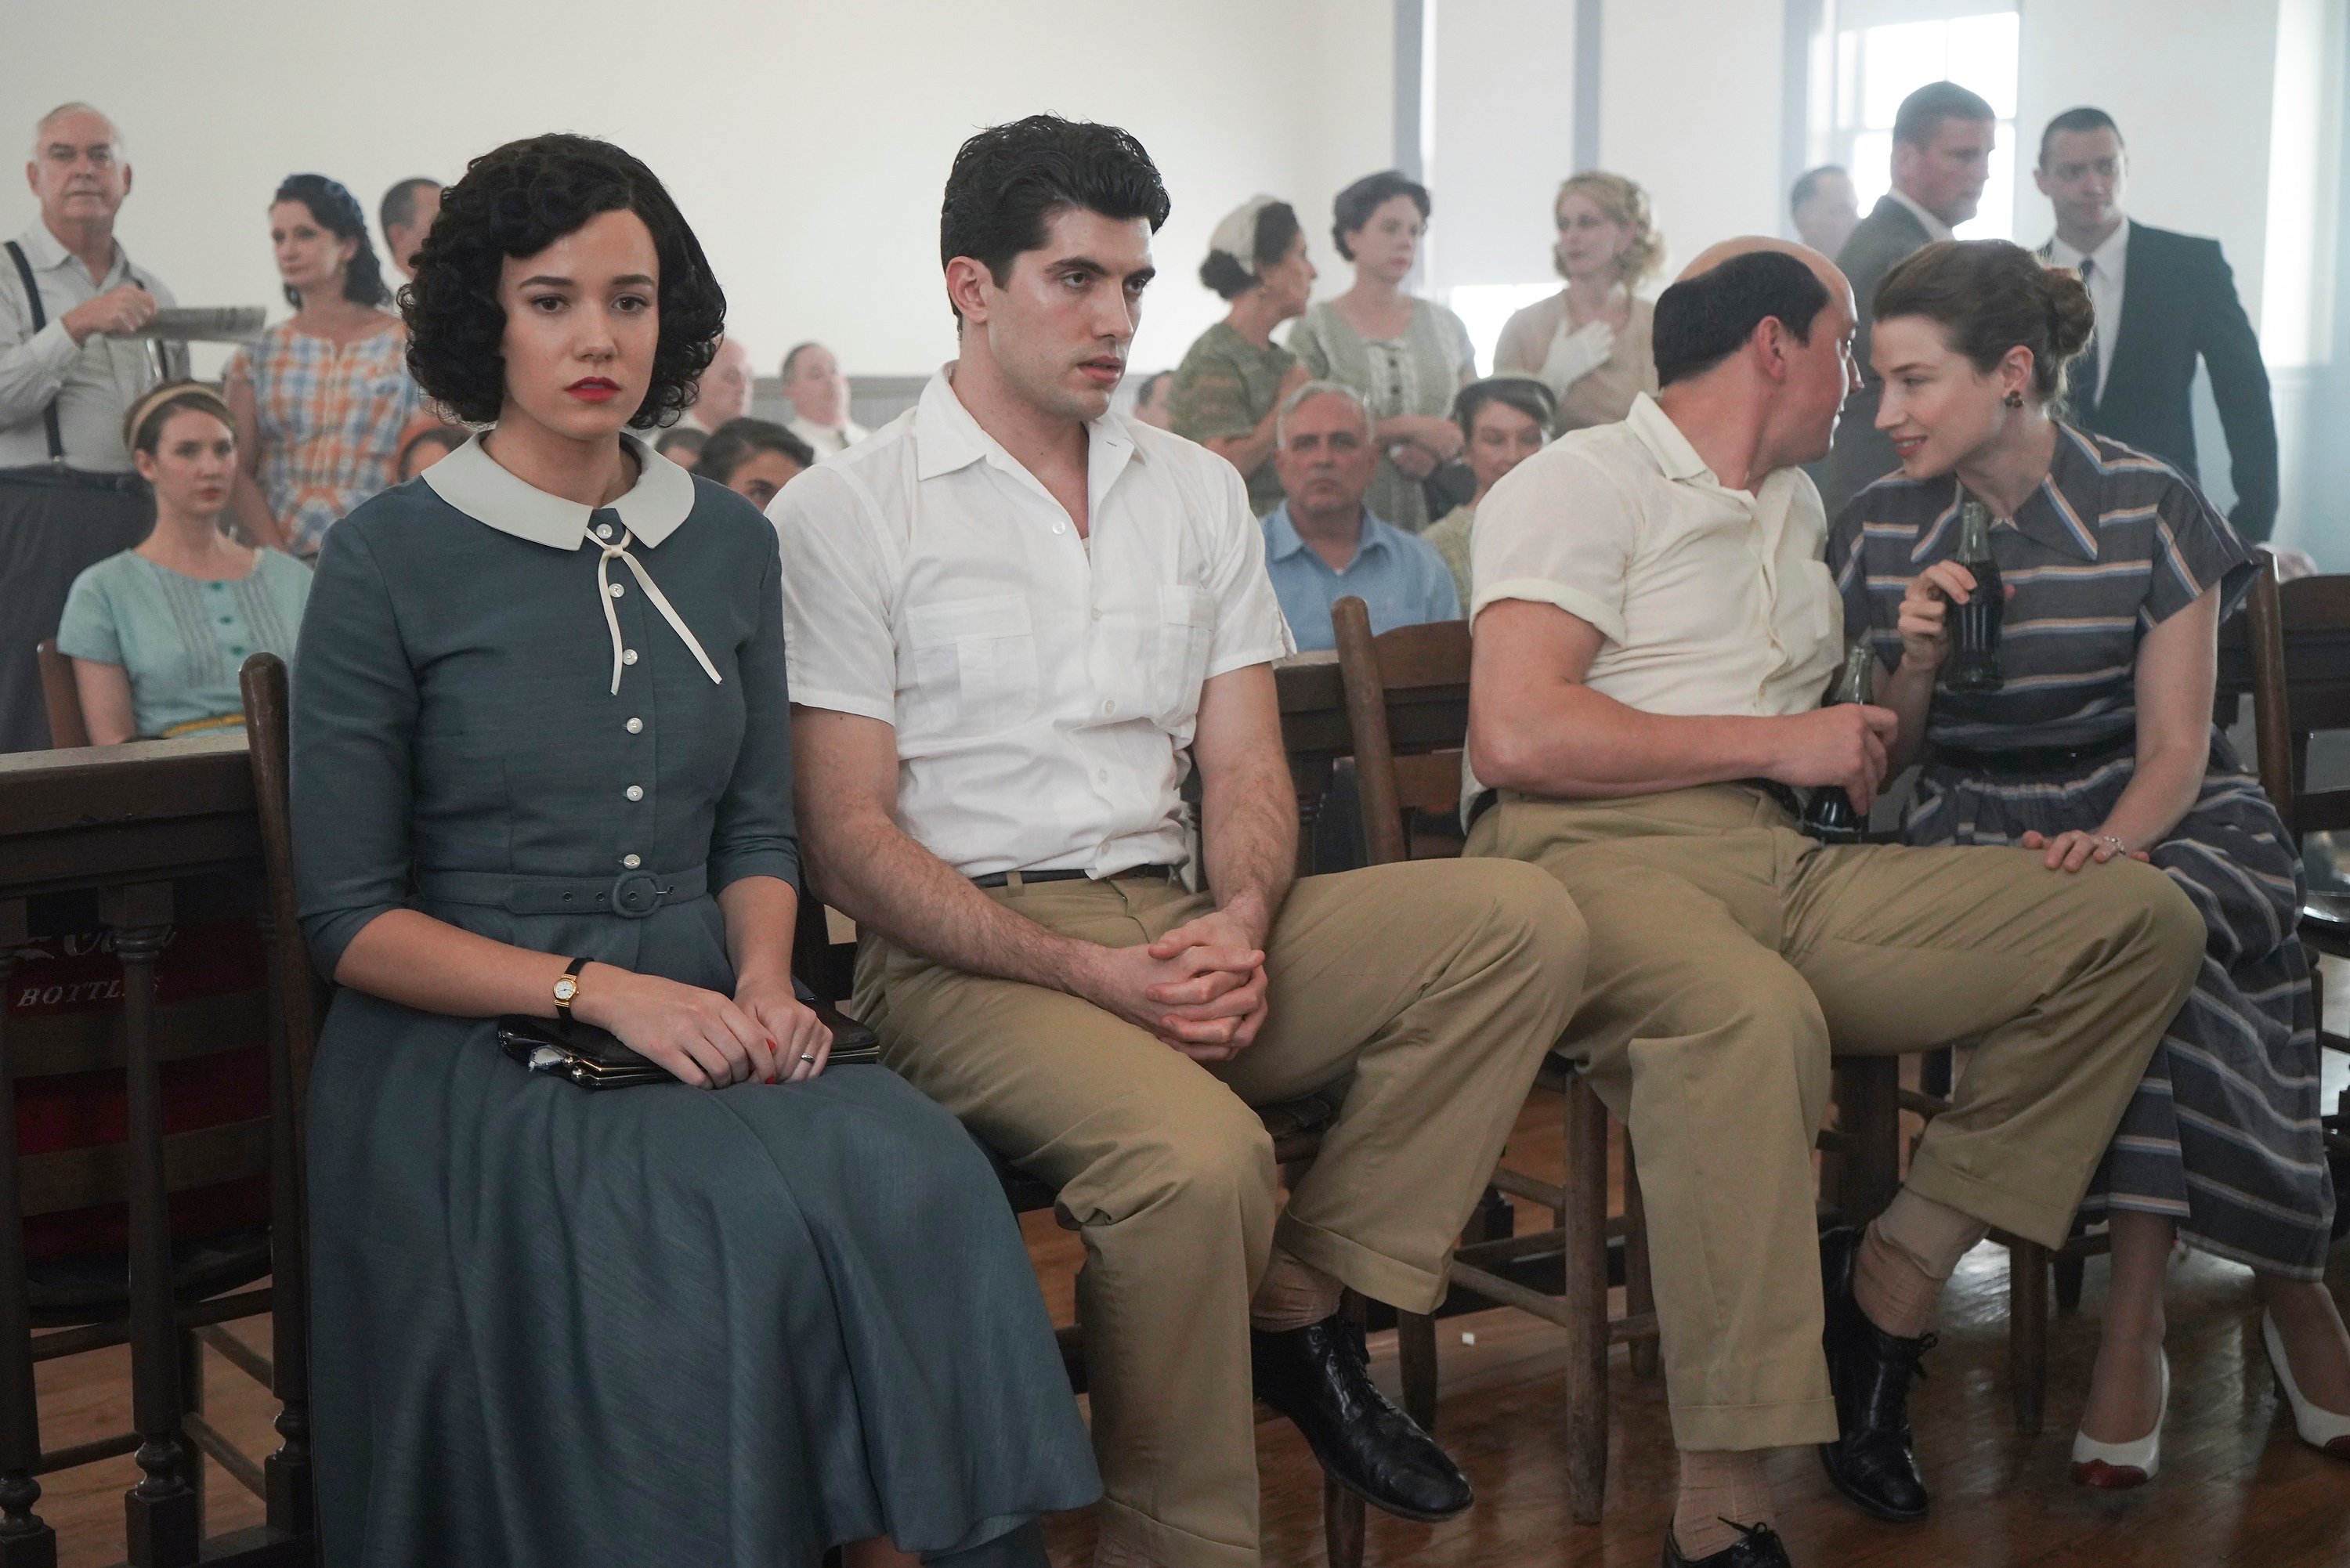 'Women of the Movement' Julia McDermott and Carter Jenkins portray Carolyn and Roy Bryant